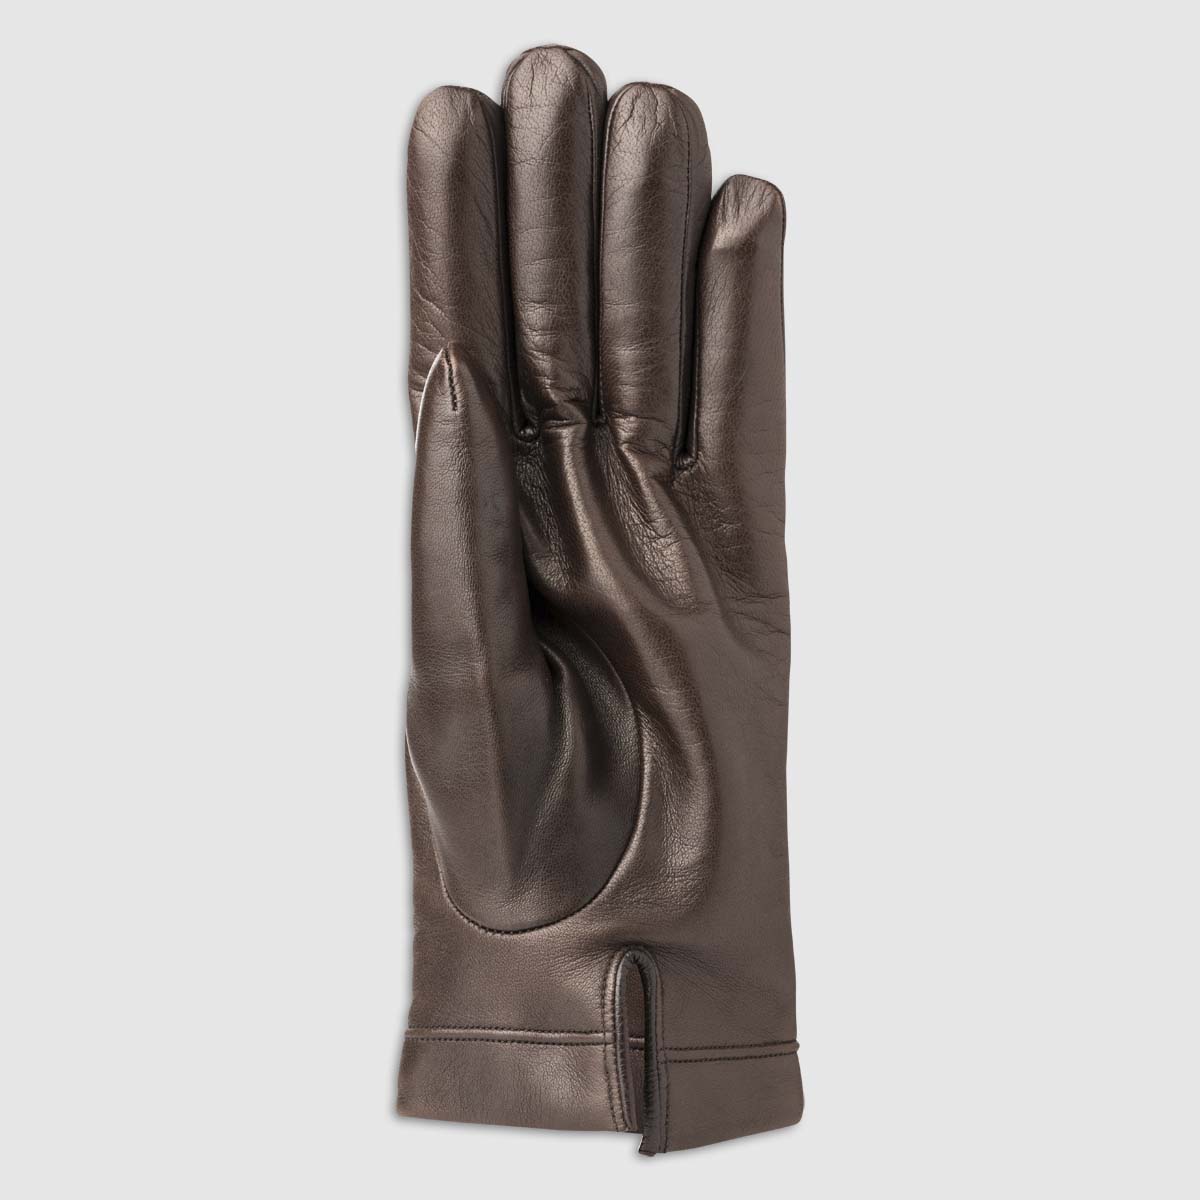 Nappa Leather Glove with Wool Lining Alpo Guanti on sale 2022 2